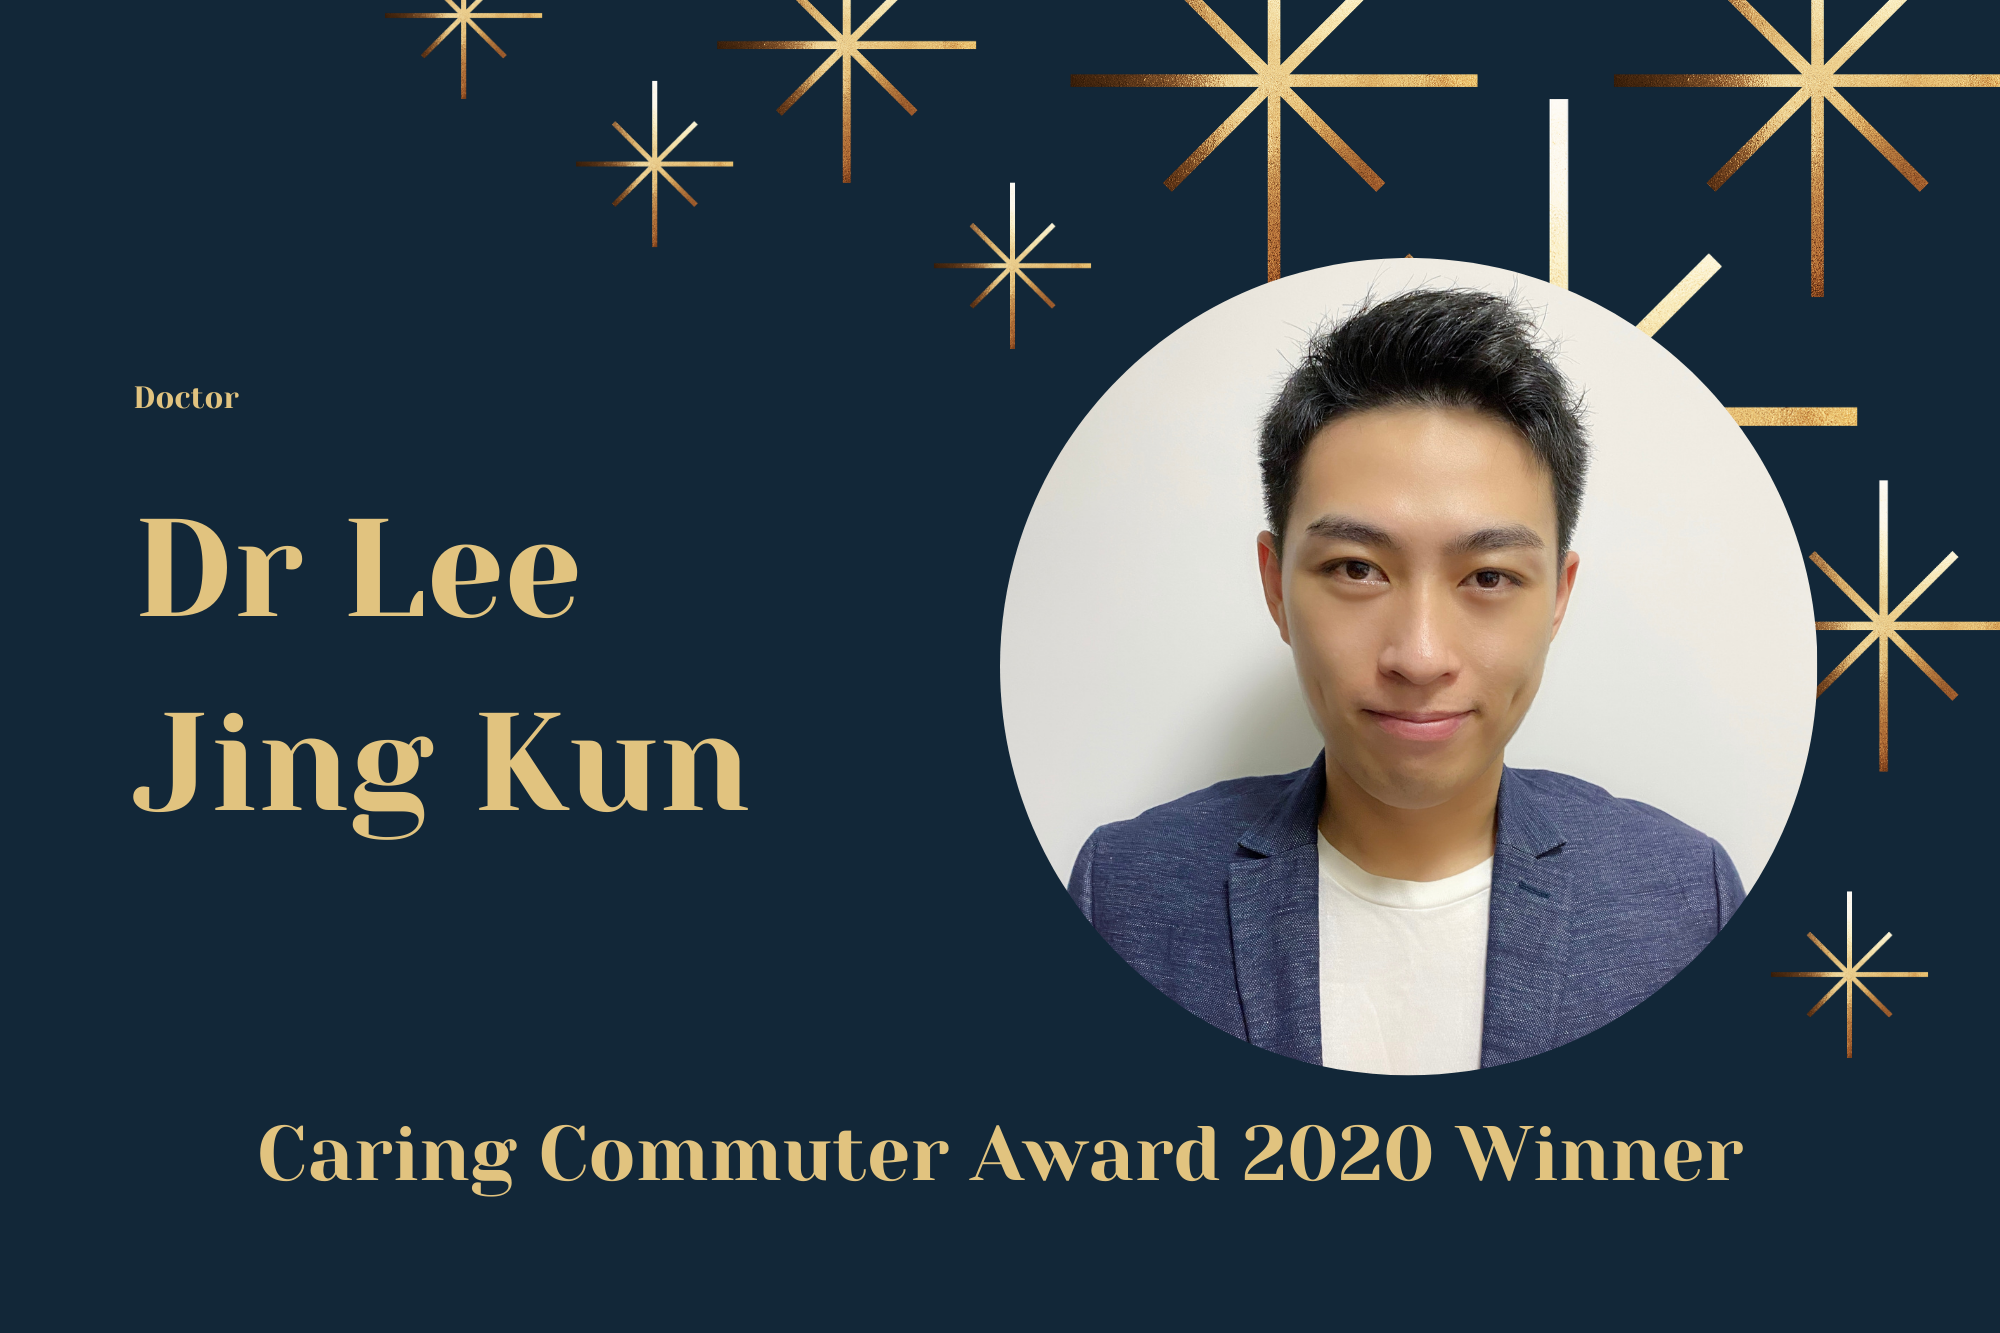 Meet Dr Lee, Doctor and Caring Commuter Award 2020 Winner